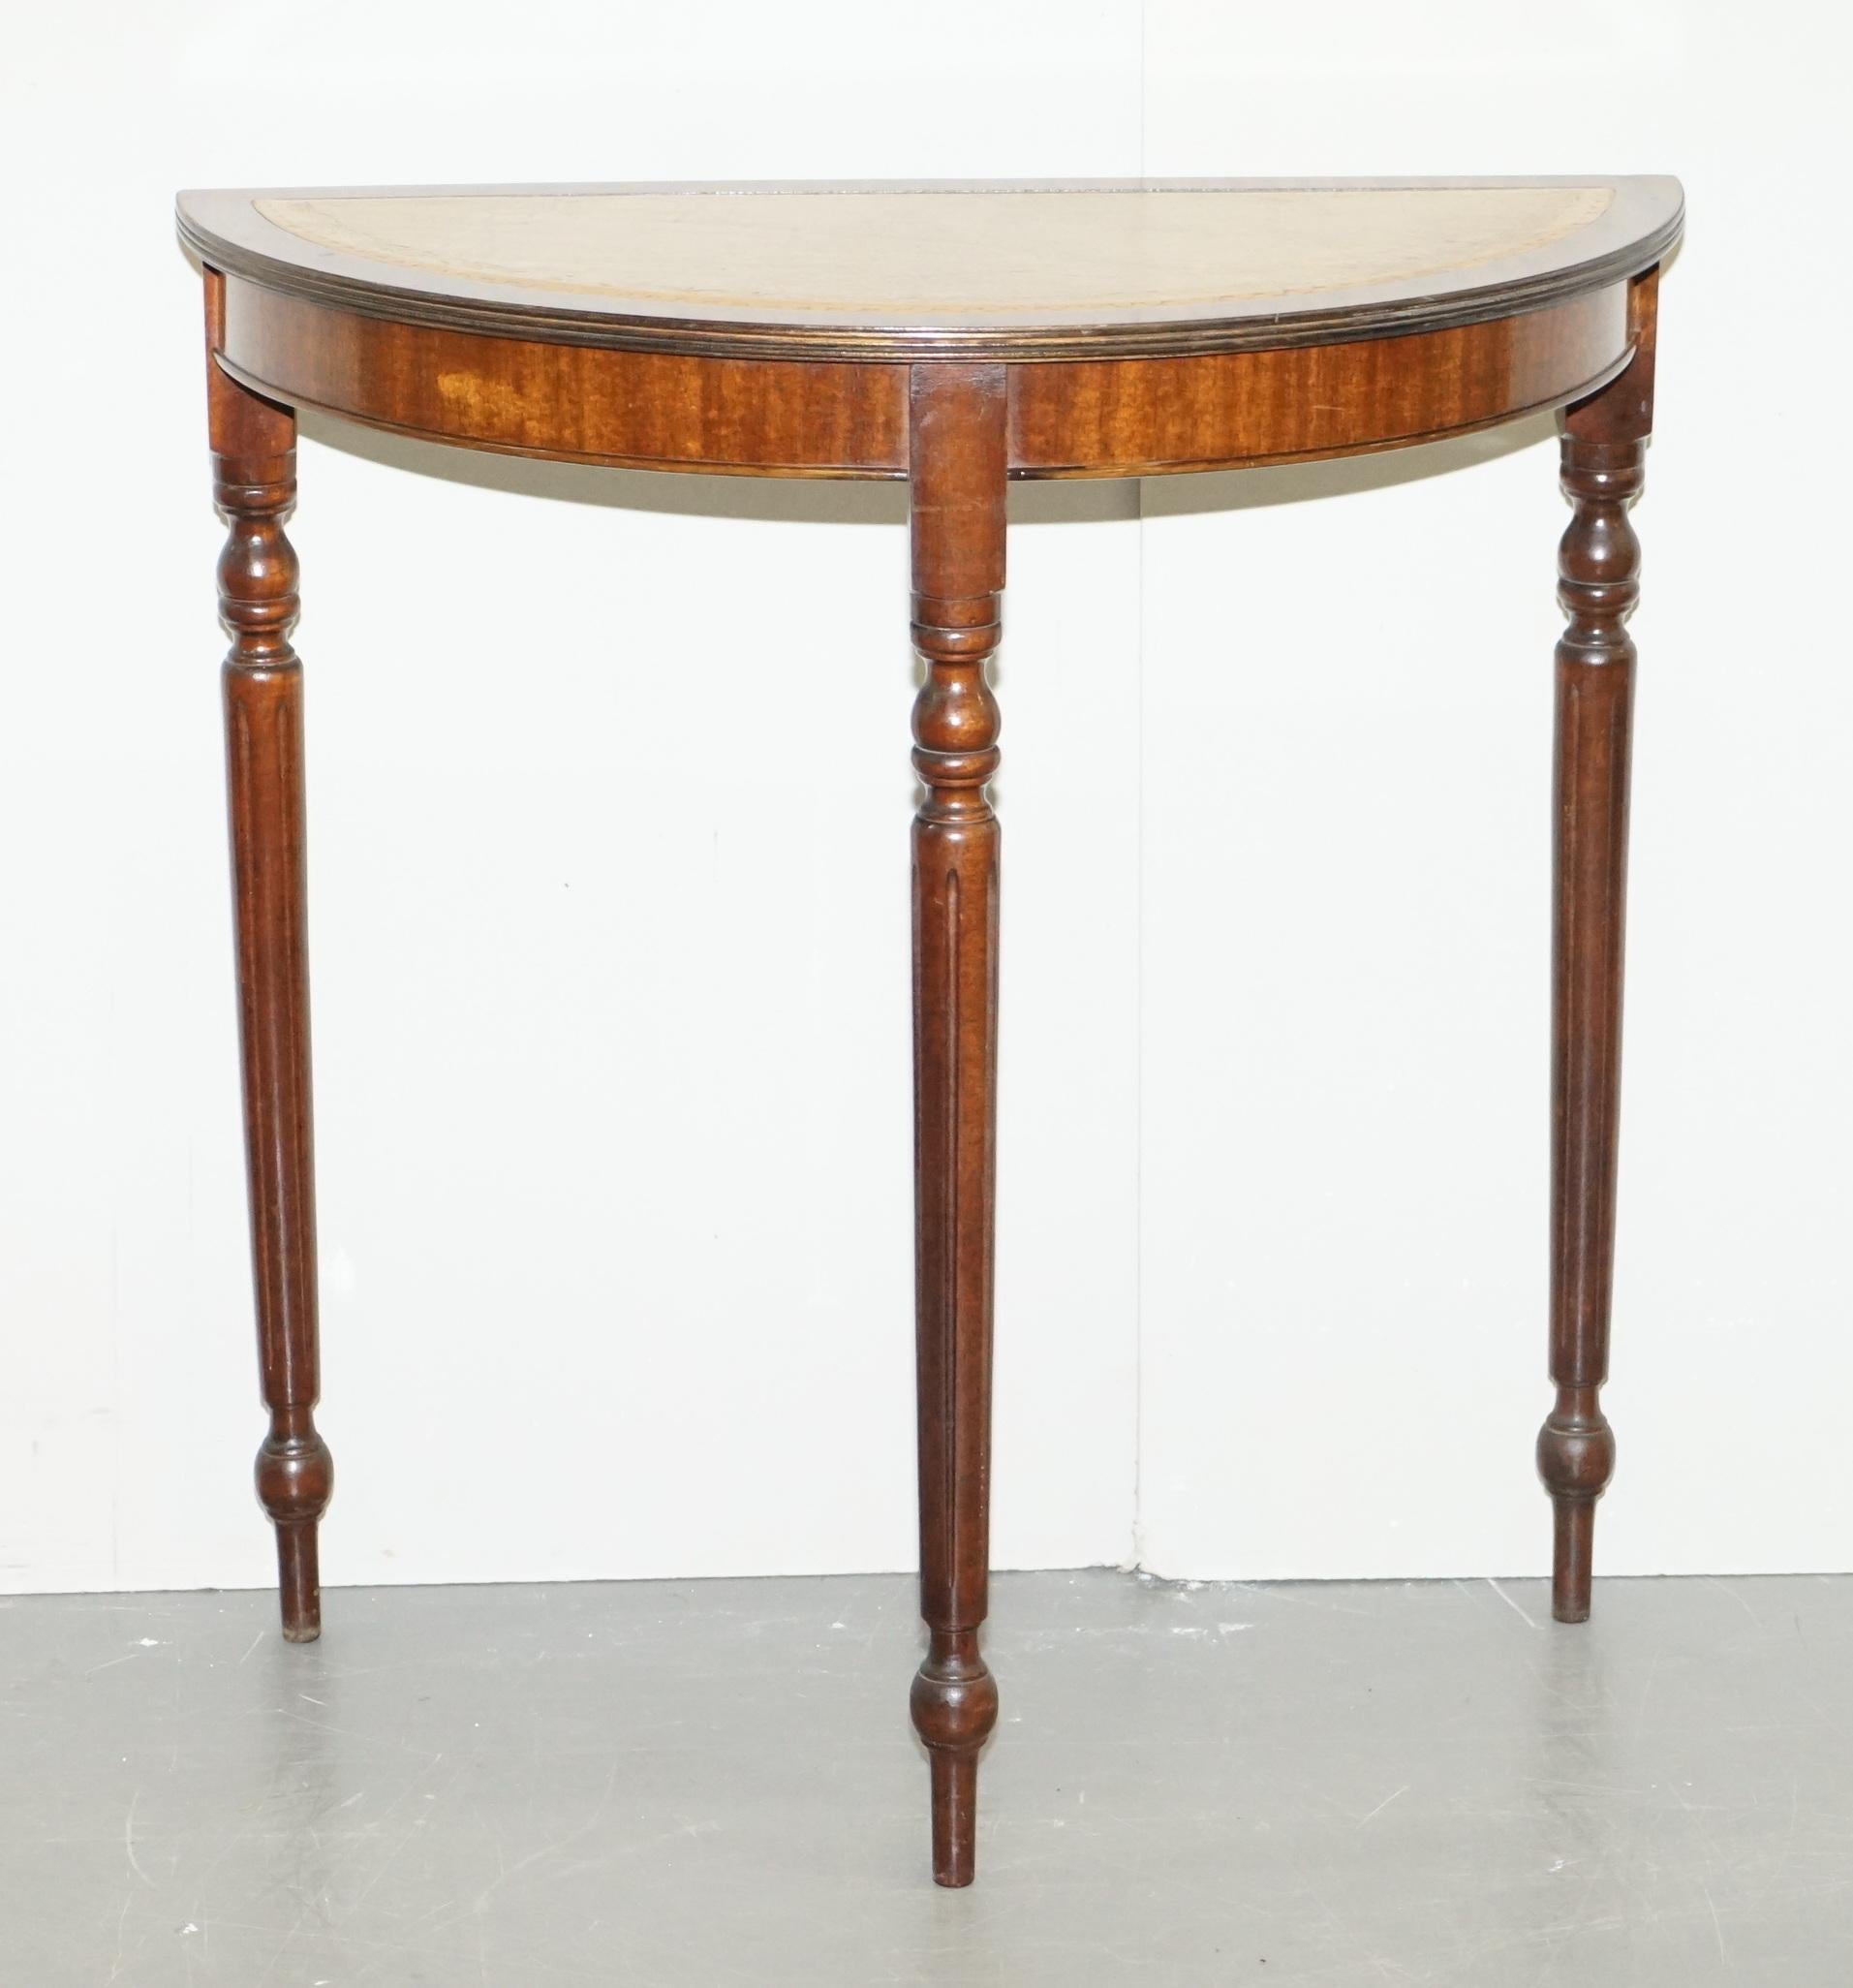 Vintage Flamed Mahogany with a Tan Brown Leather Top Demilune Console Table (Art déco)